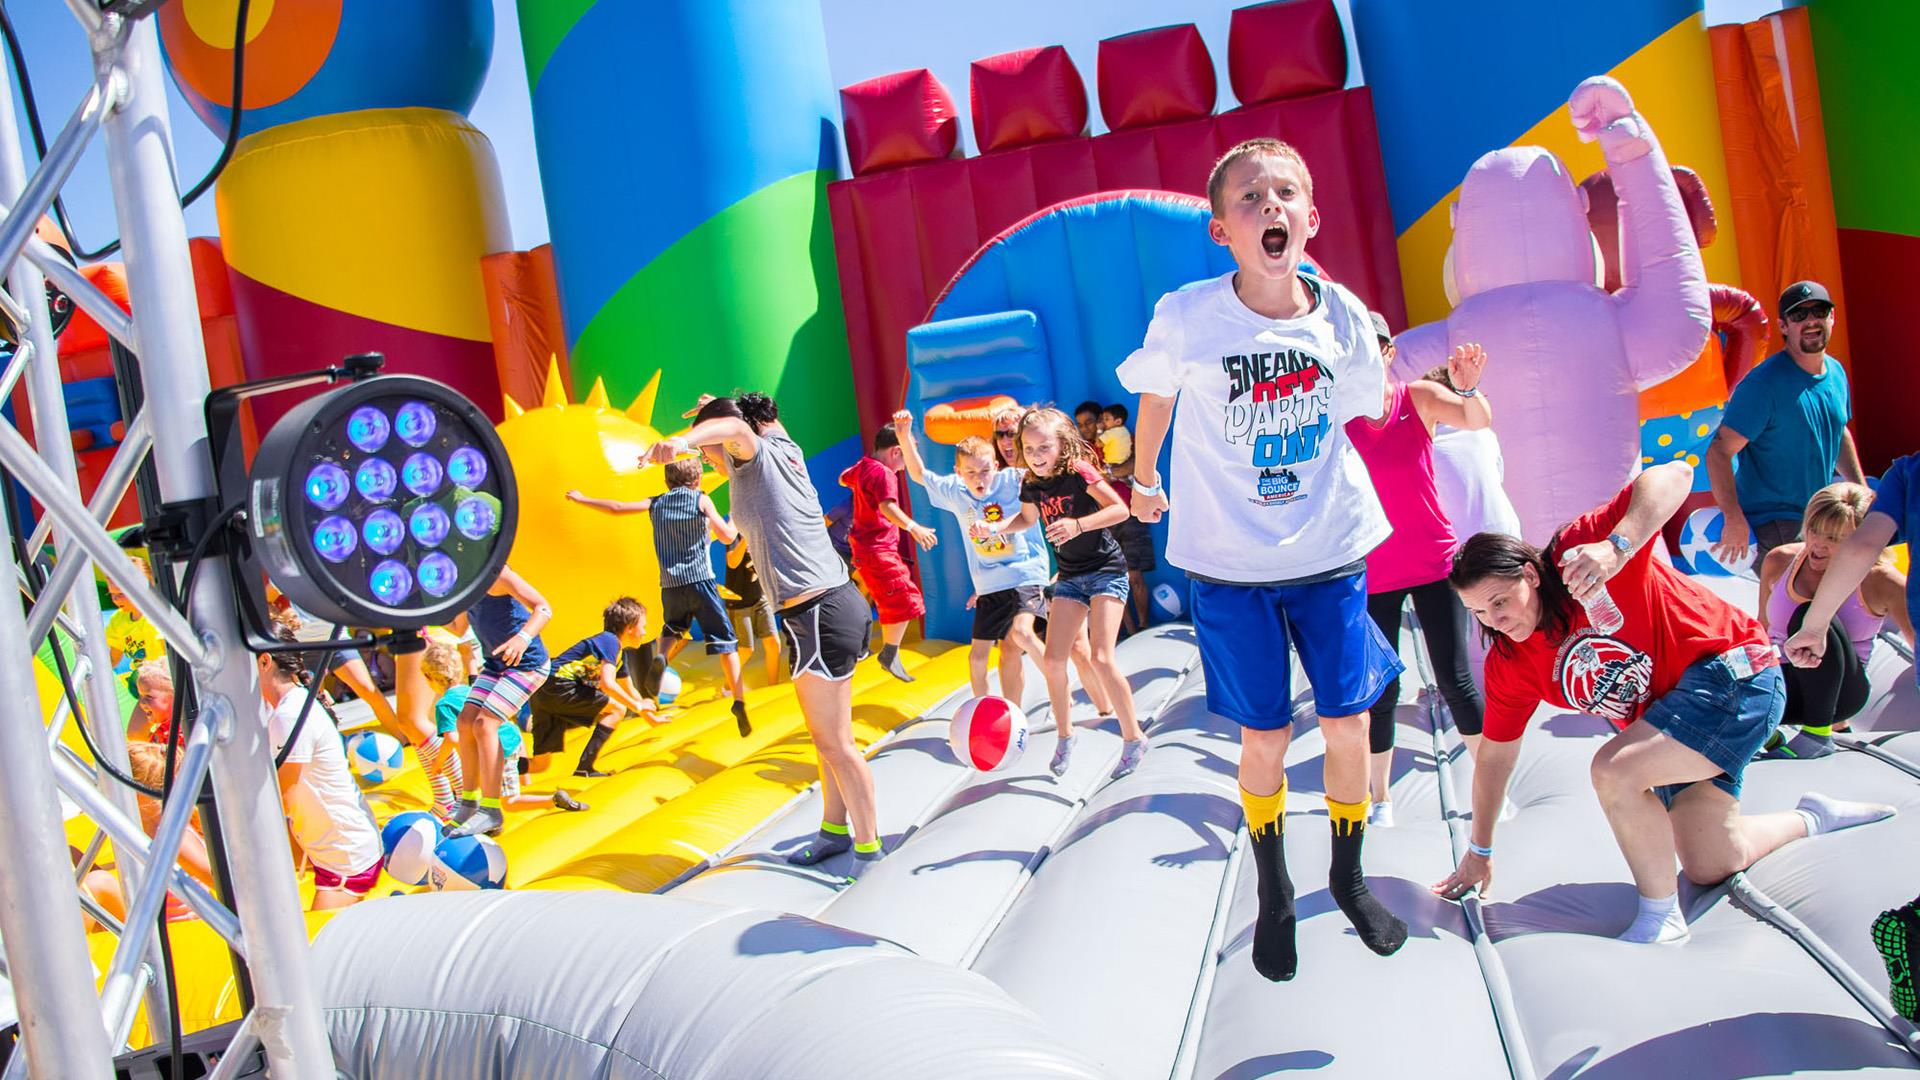 The biggest bounce house in the world is 10,000 square feet